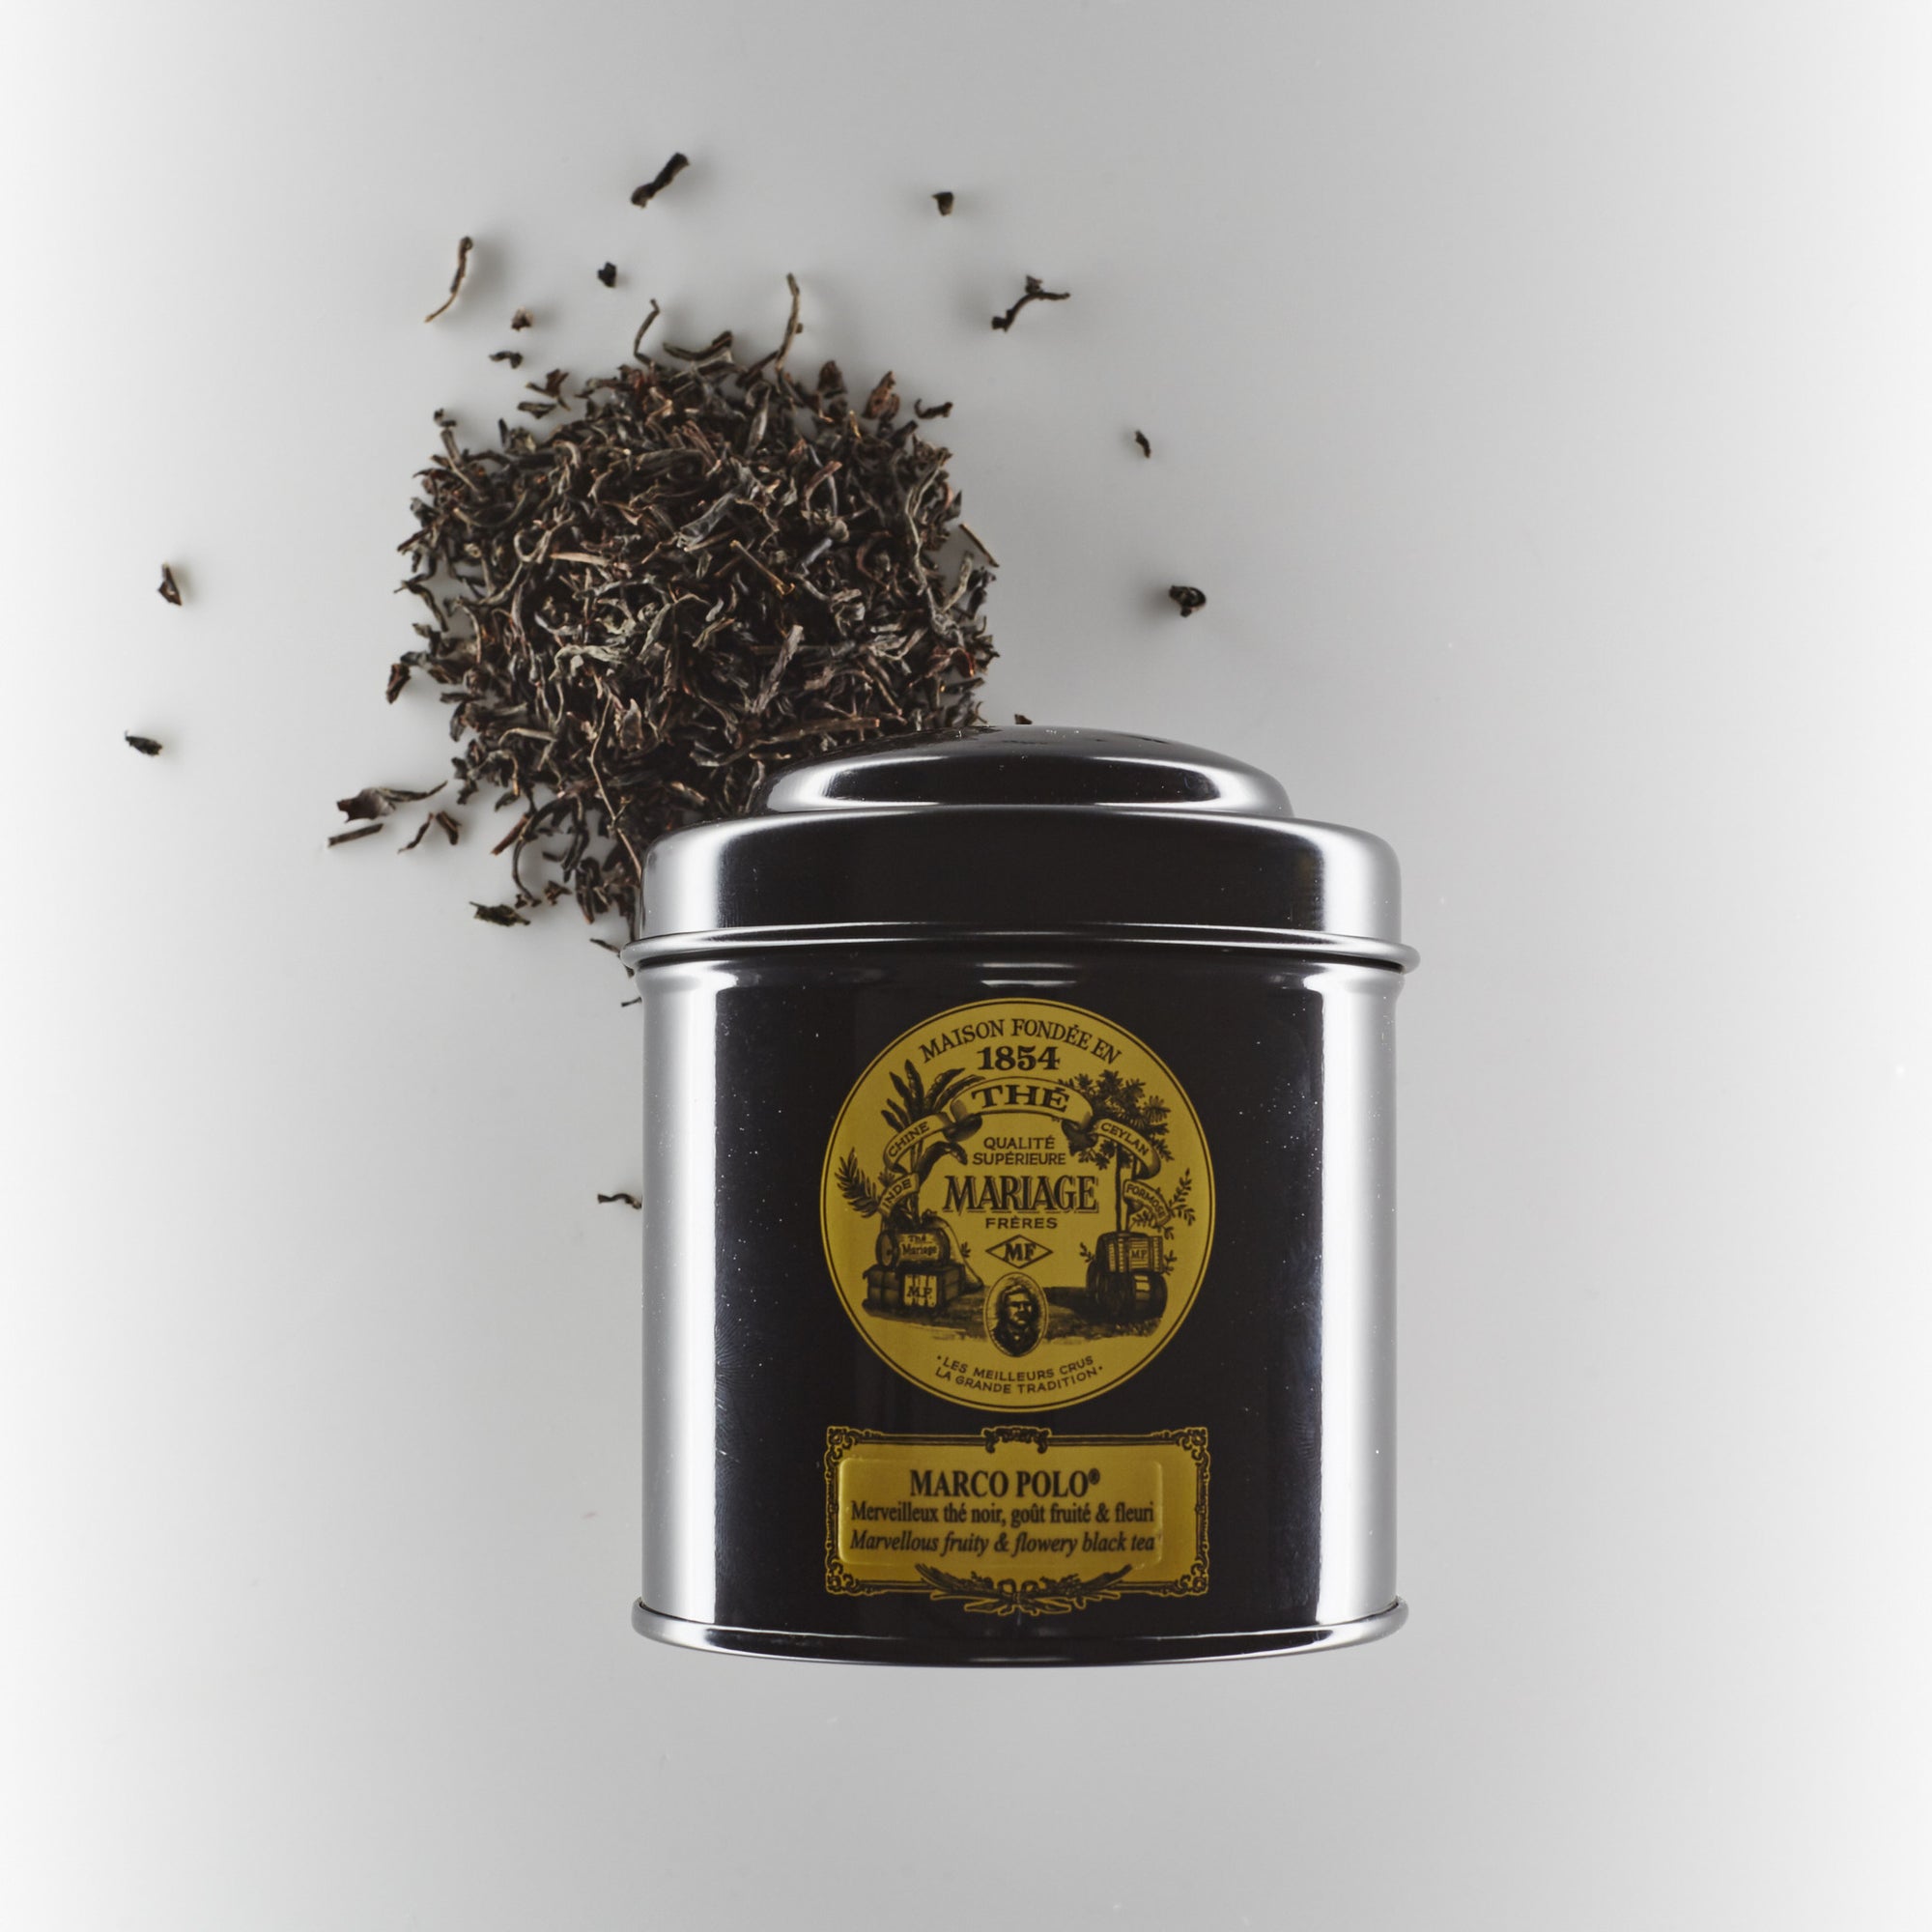 Mariage Freres. Earl Grey French Blue Tea, 30 Tea Bags 75g (1 Pack).